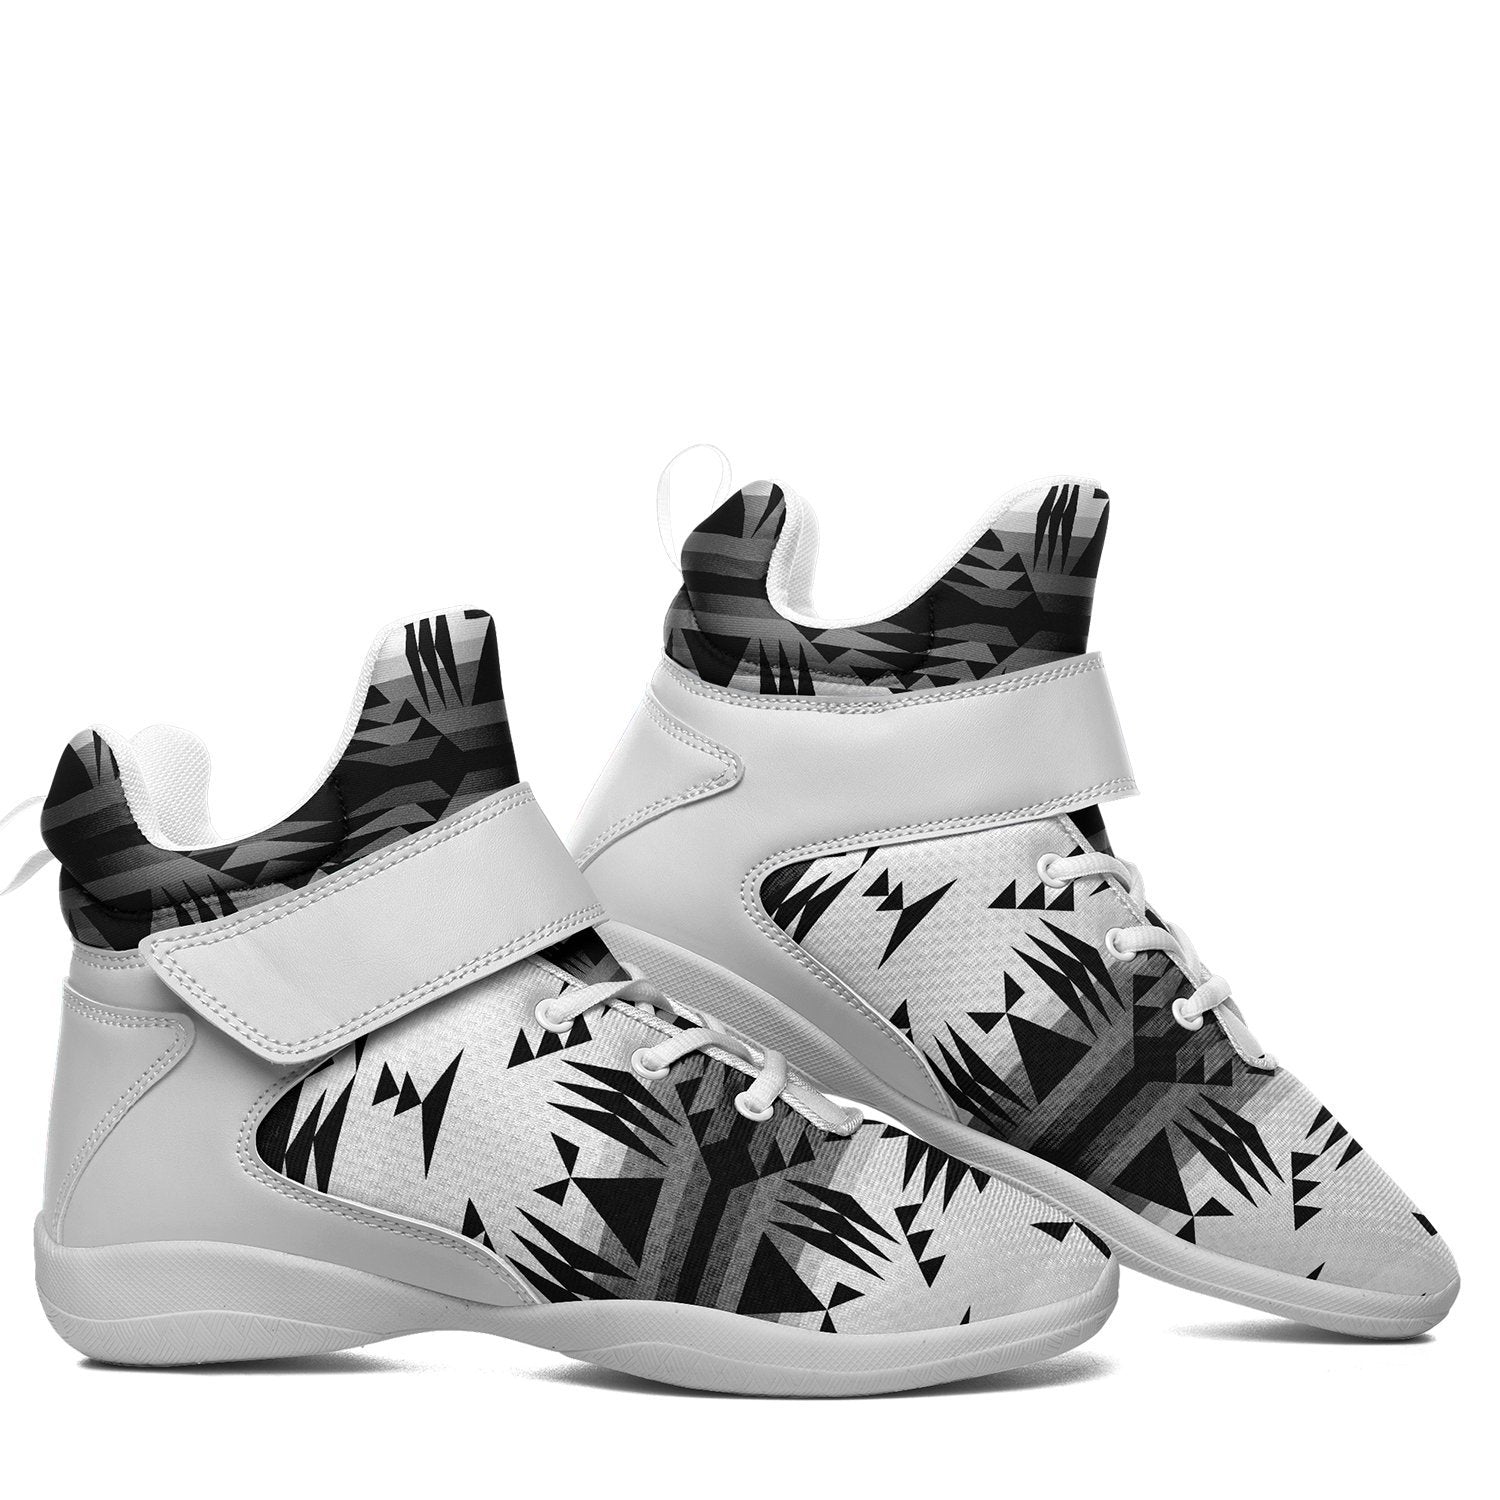 Between the Mountains White and Black Kid's Ipottaa Basketball / Sport High Top Shoes 49 Dzine 